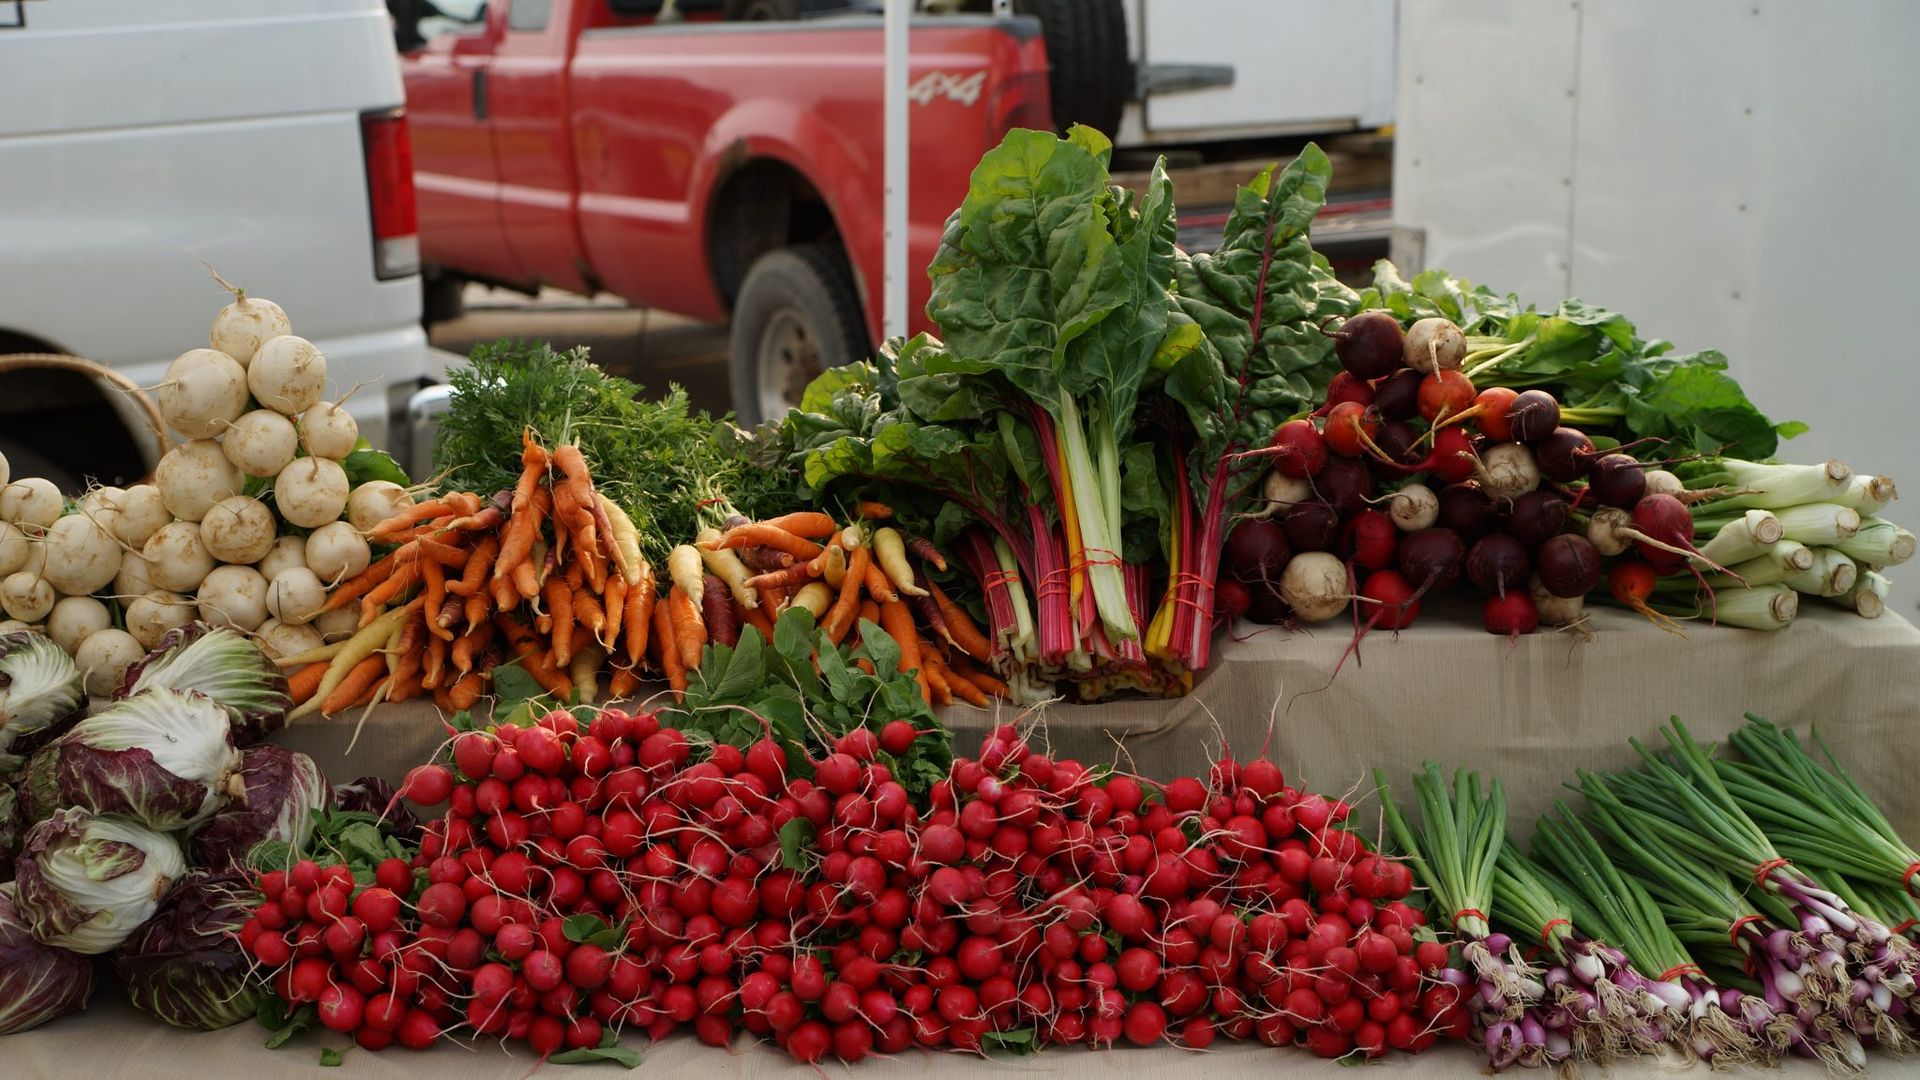 piles of produce on table with truck in background